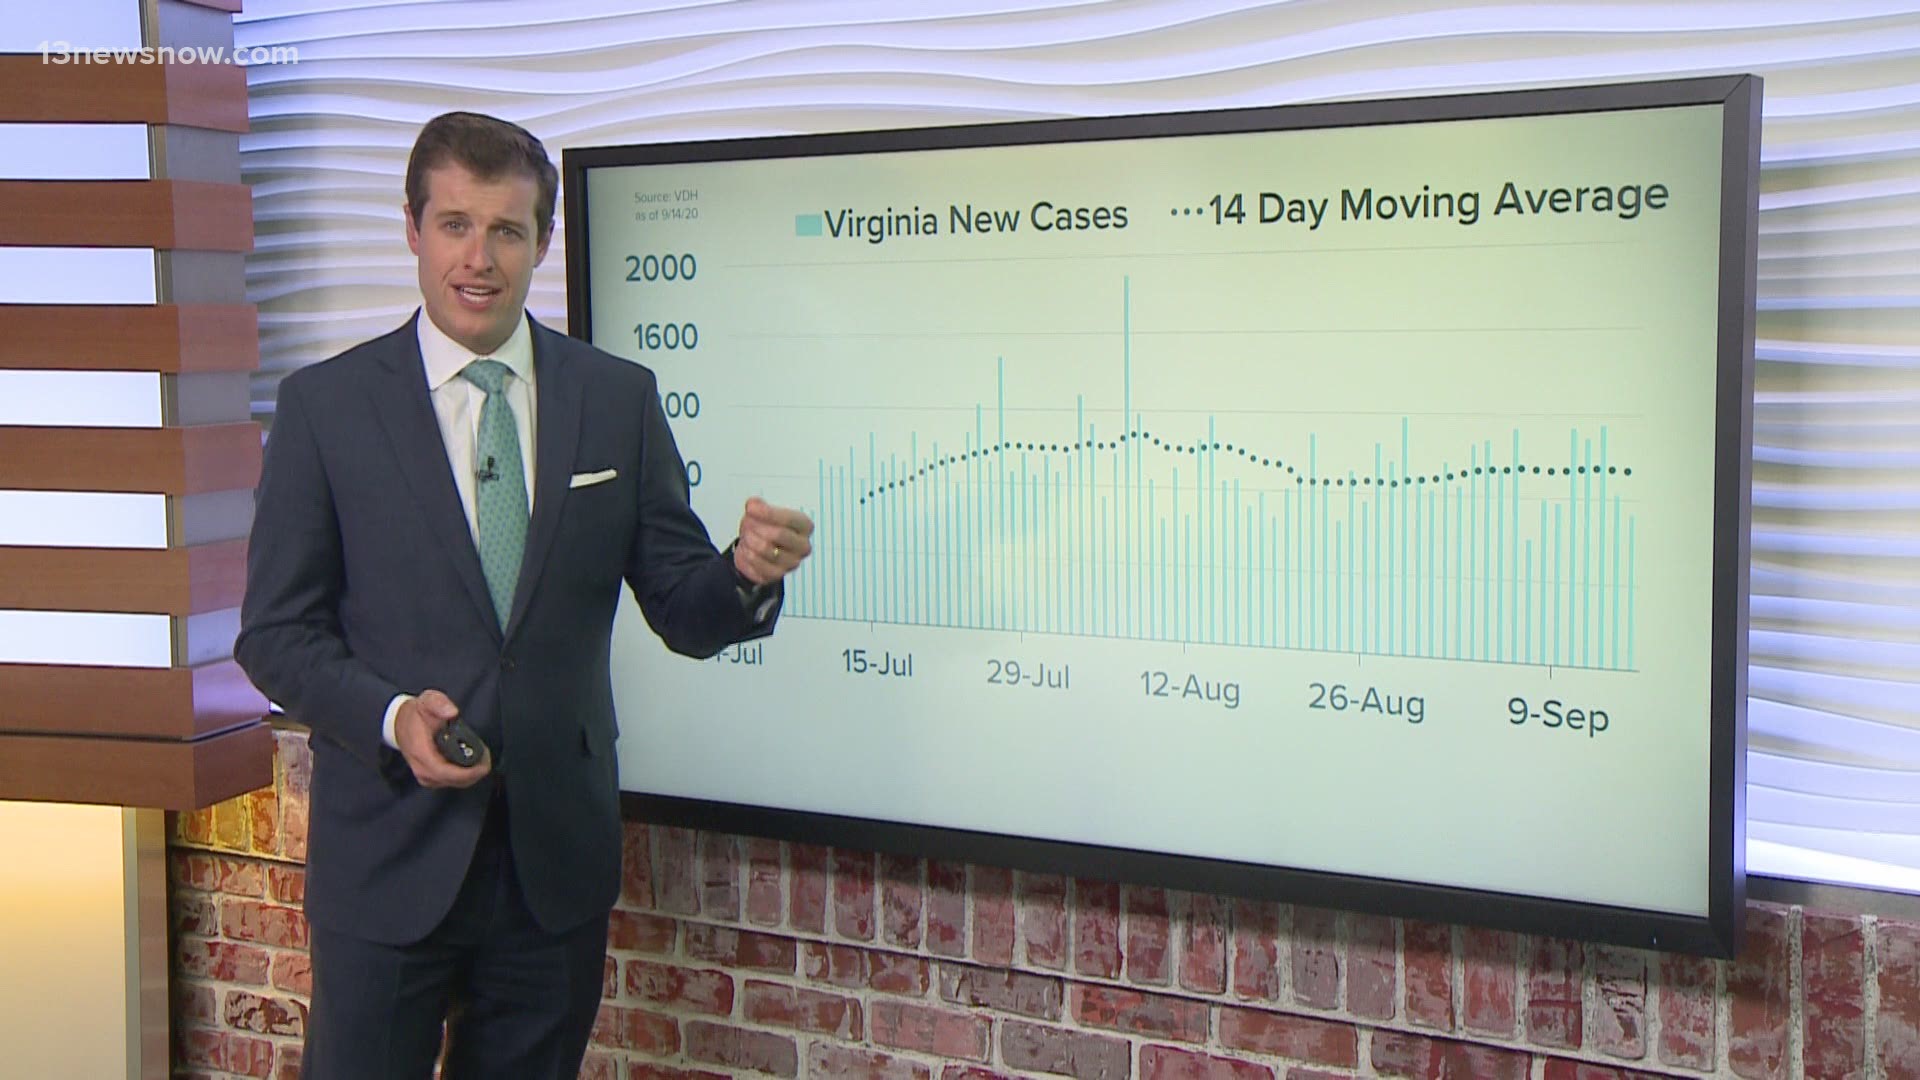 13News Now anchor Dan Kennedy breaks down the local and state COVID-19 health metrics as of September 14, 2020.